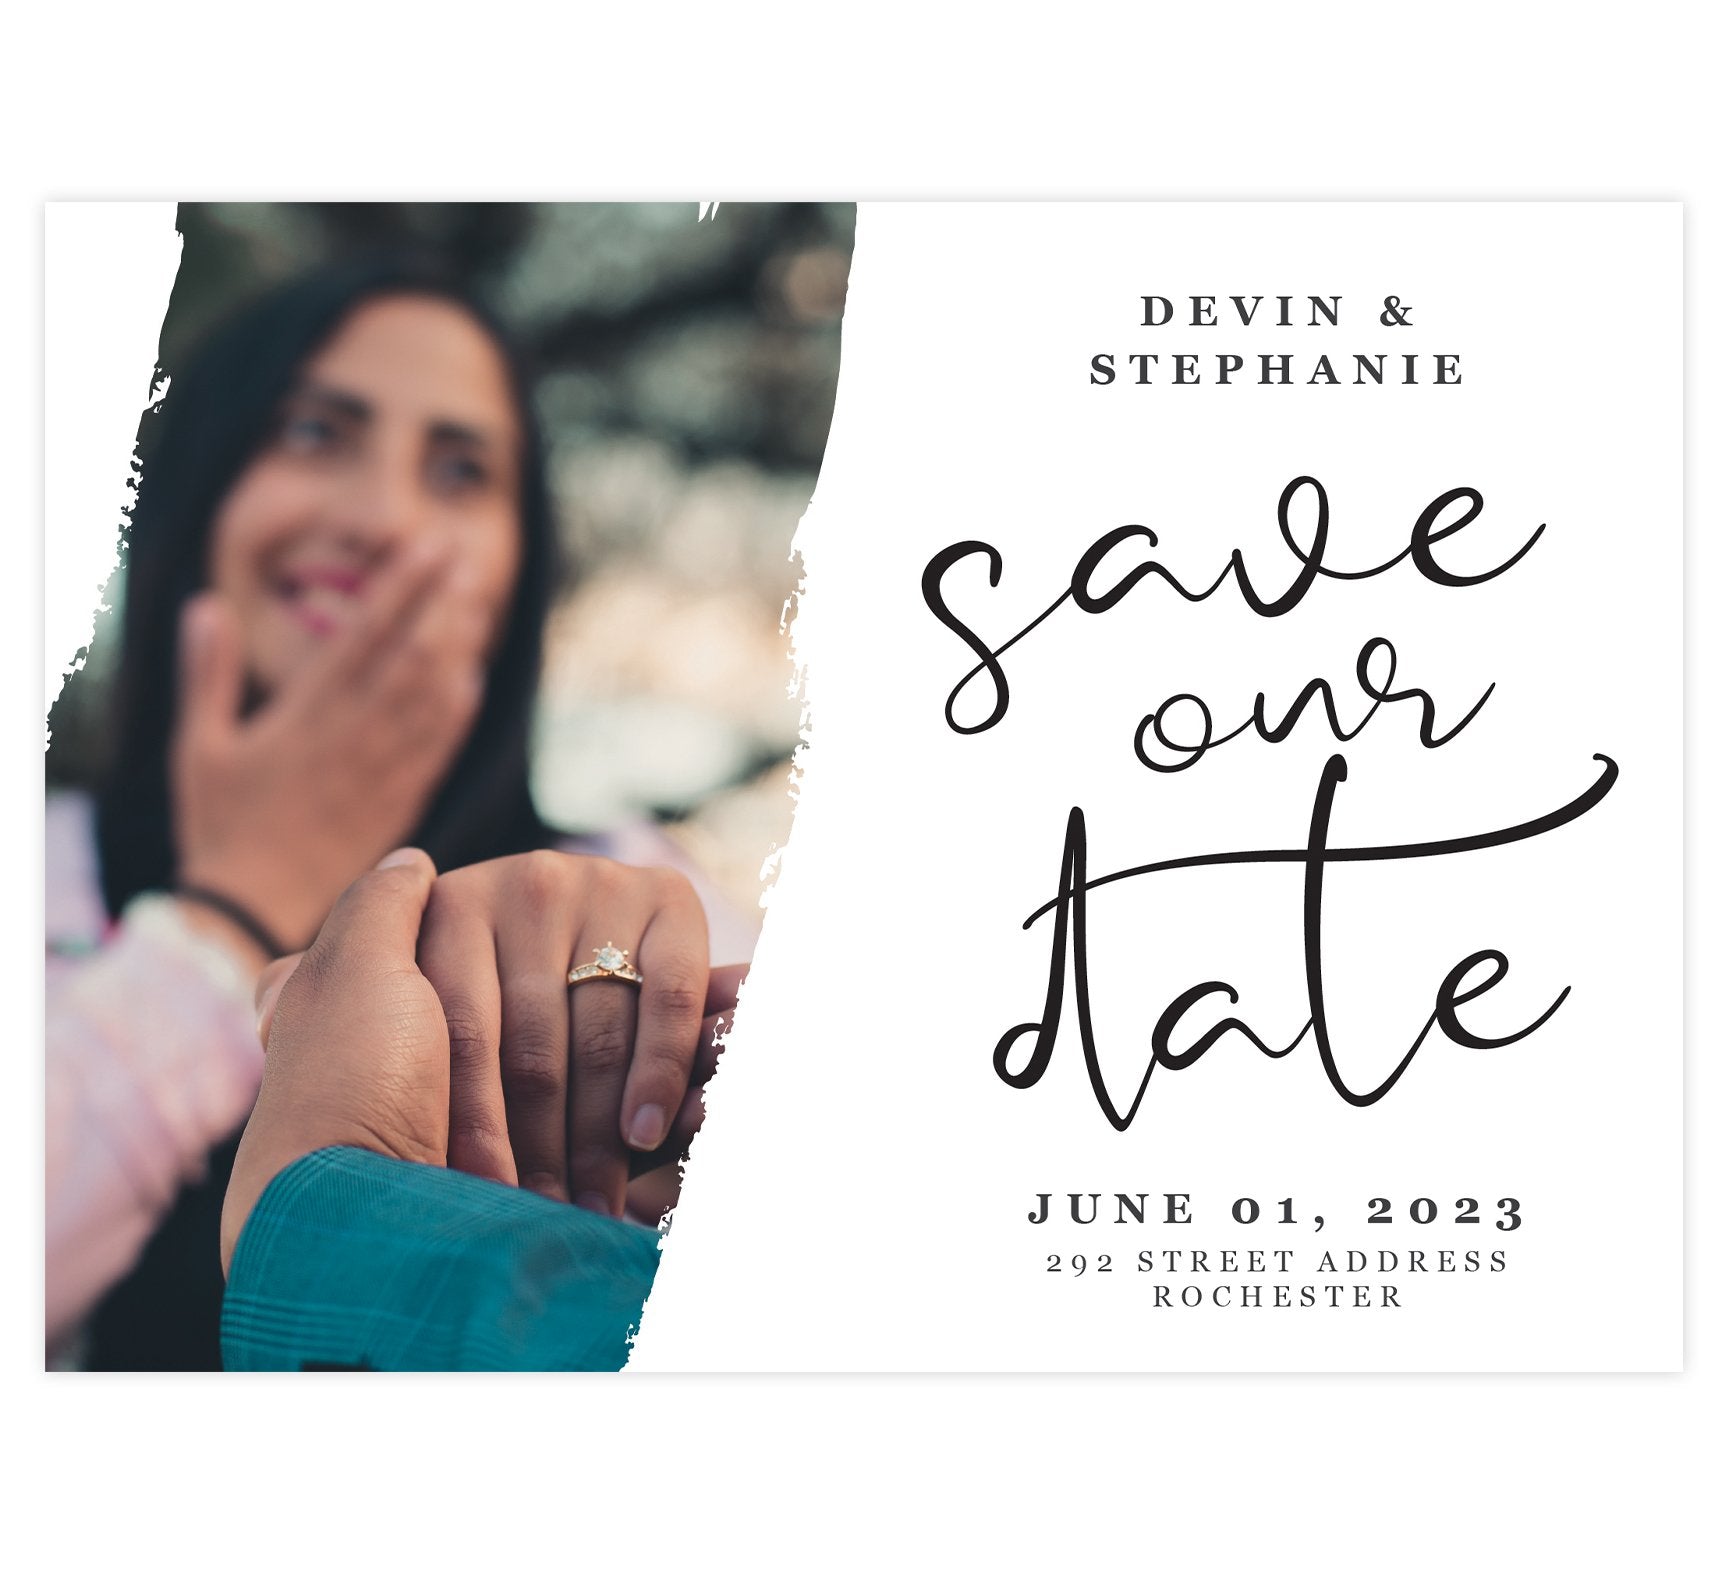 Wedding White Save the Date Card with 3 image spots